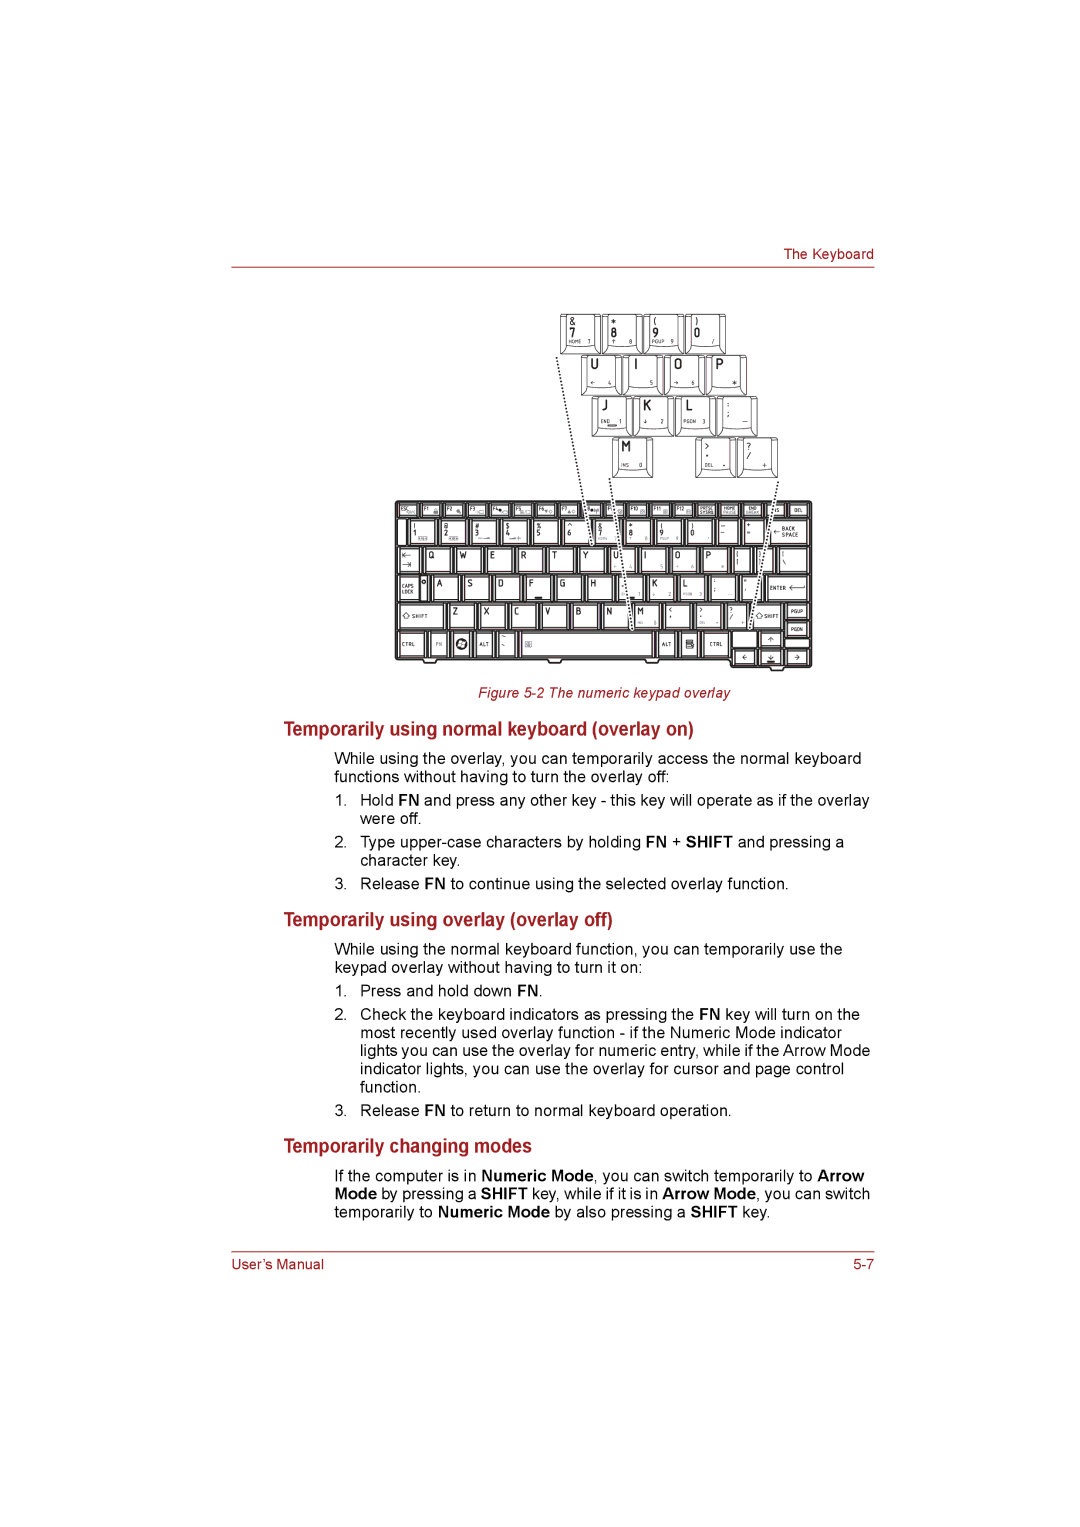 Toshiba NB255N245 user manual Temporarily using normal keyboard overlay on, Temporarily using overlay overlay off 